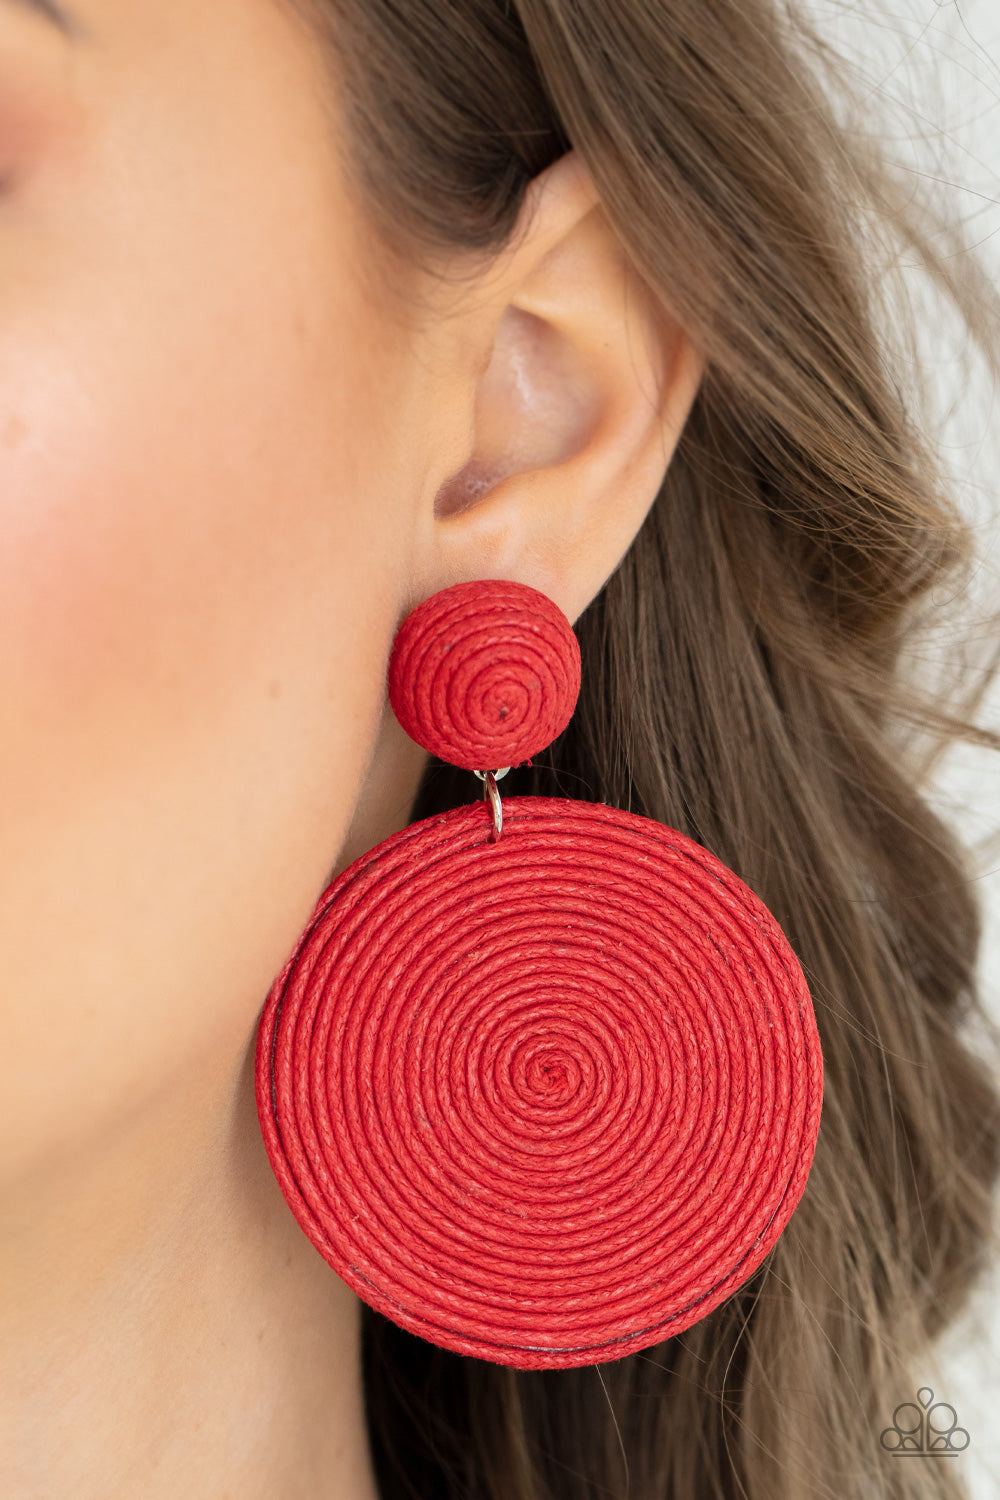 Paparazzi Circulate The Room - Red Earrings - A Finishing Touch Jewelry